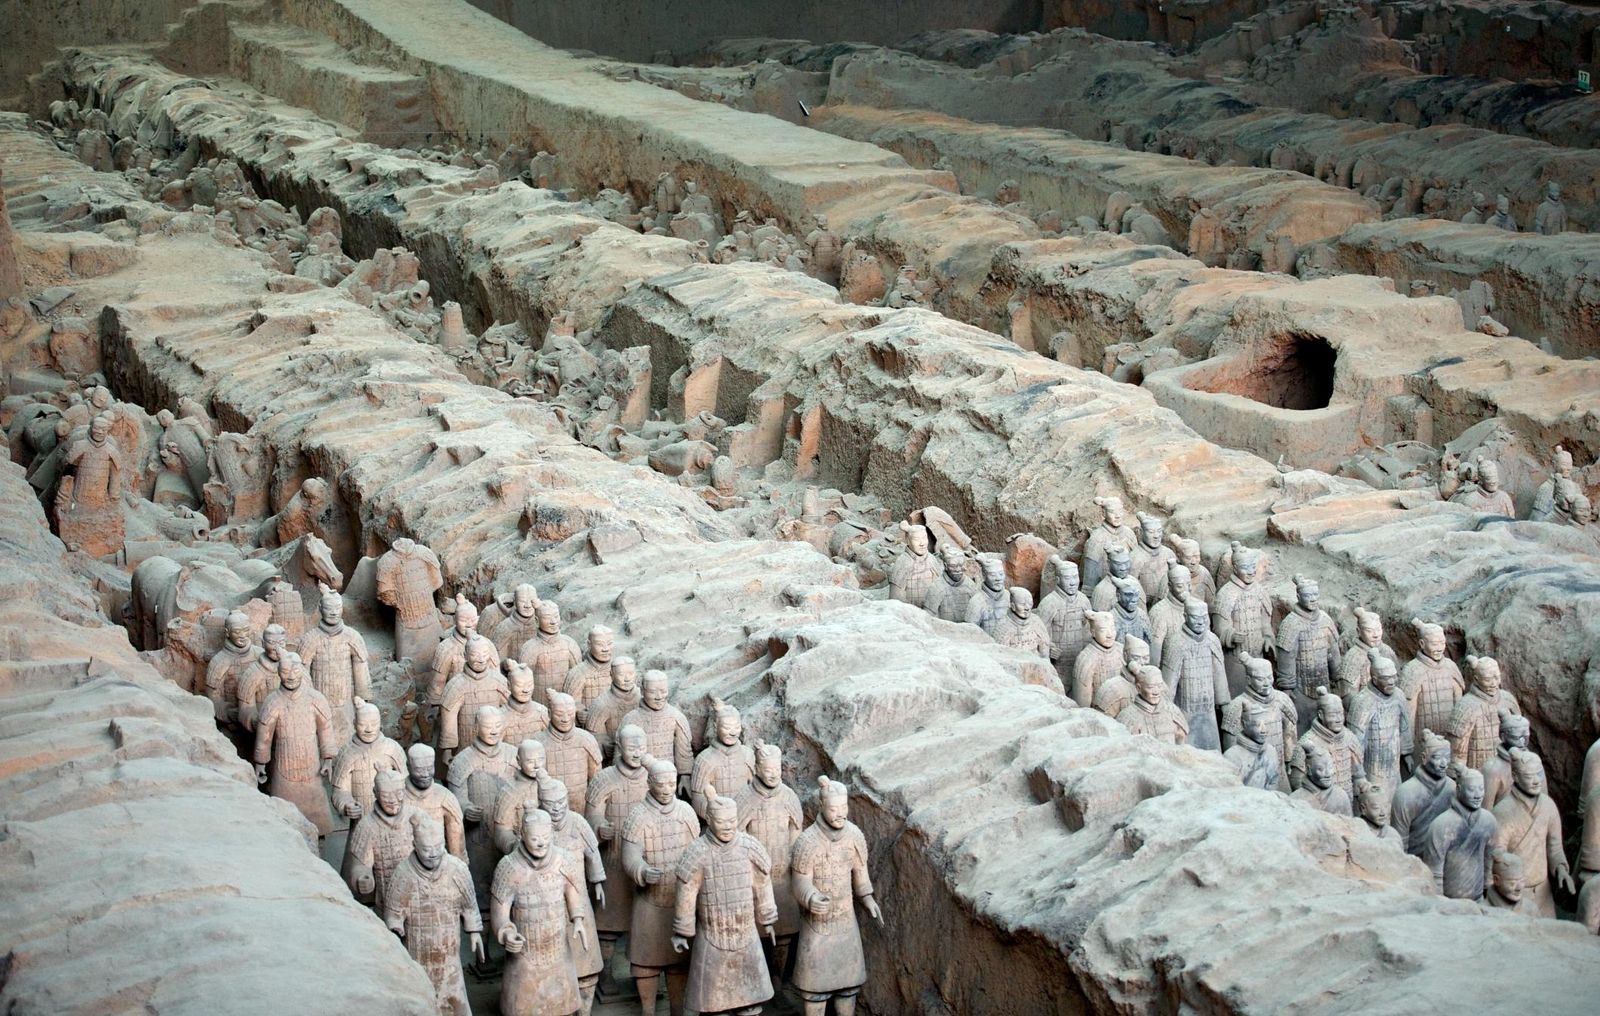 Archaeologists Excavate 200 More Chinese Terracotta Warriors | Smart News| Smithsonian Magazine